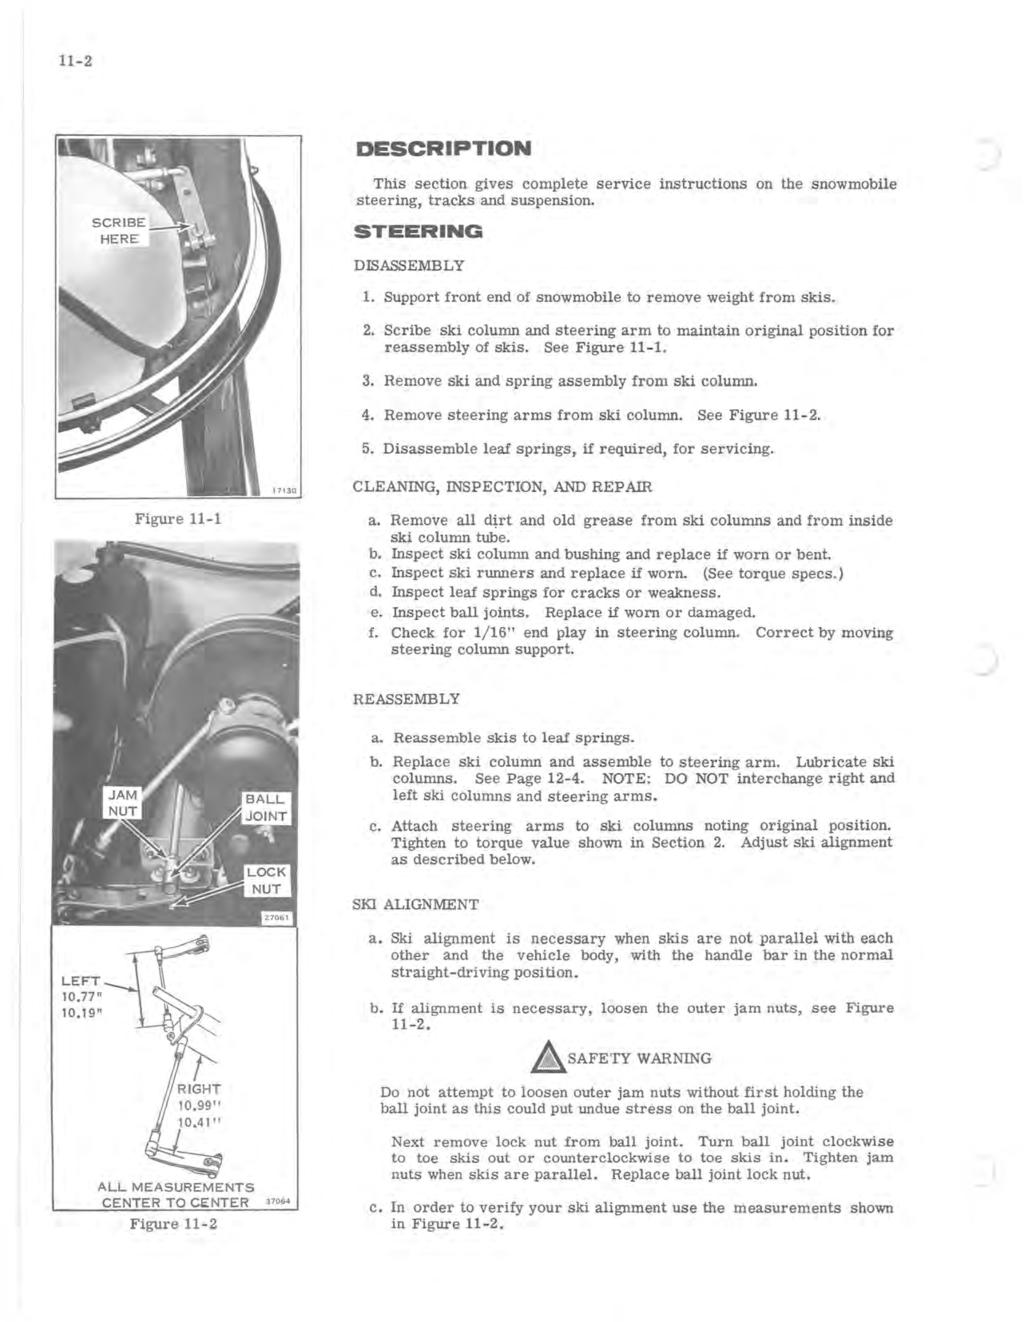 11-2 DESCRIPTION This section gives complete service instructions on the snowmobile steering, tracks and suspension. STEERING DISASSEMBLY 1. Support front end of snowmobile to remove weight from skis.